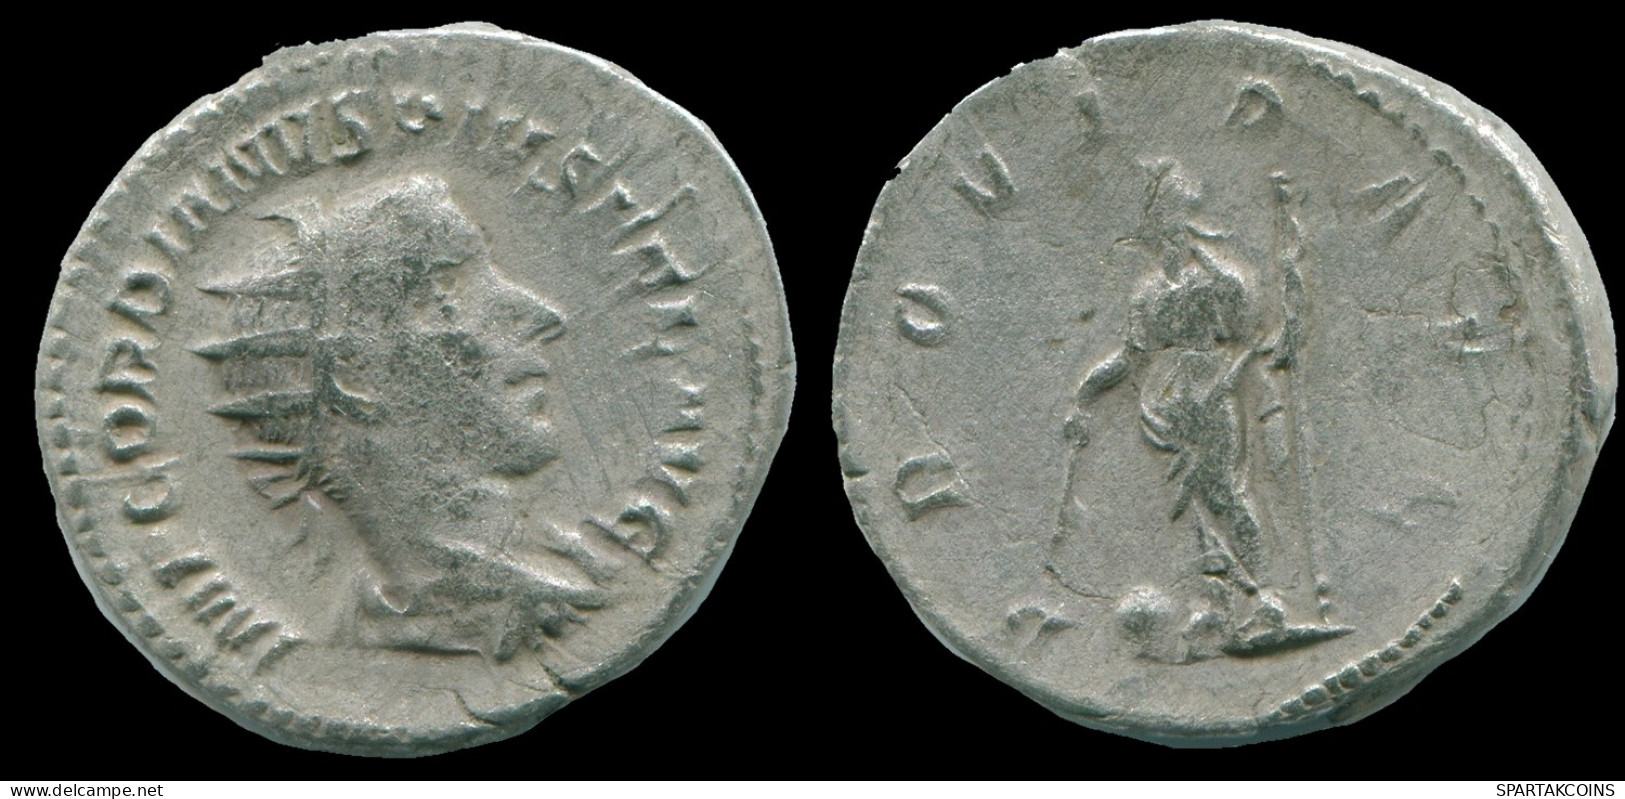 GORDIAN III AR ANTONINIANUS ROME AD 244 4TH OFFICINA PROVID AVG #ANC13120.43.D.A - The Military Crisis (235 AD To 284 AD)